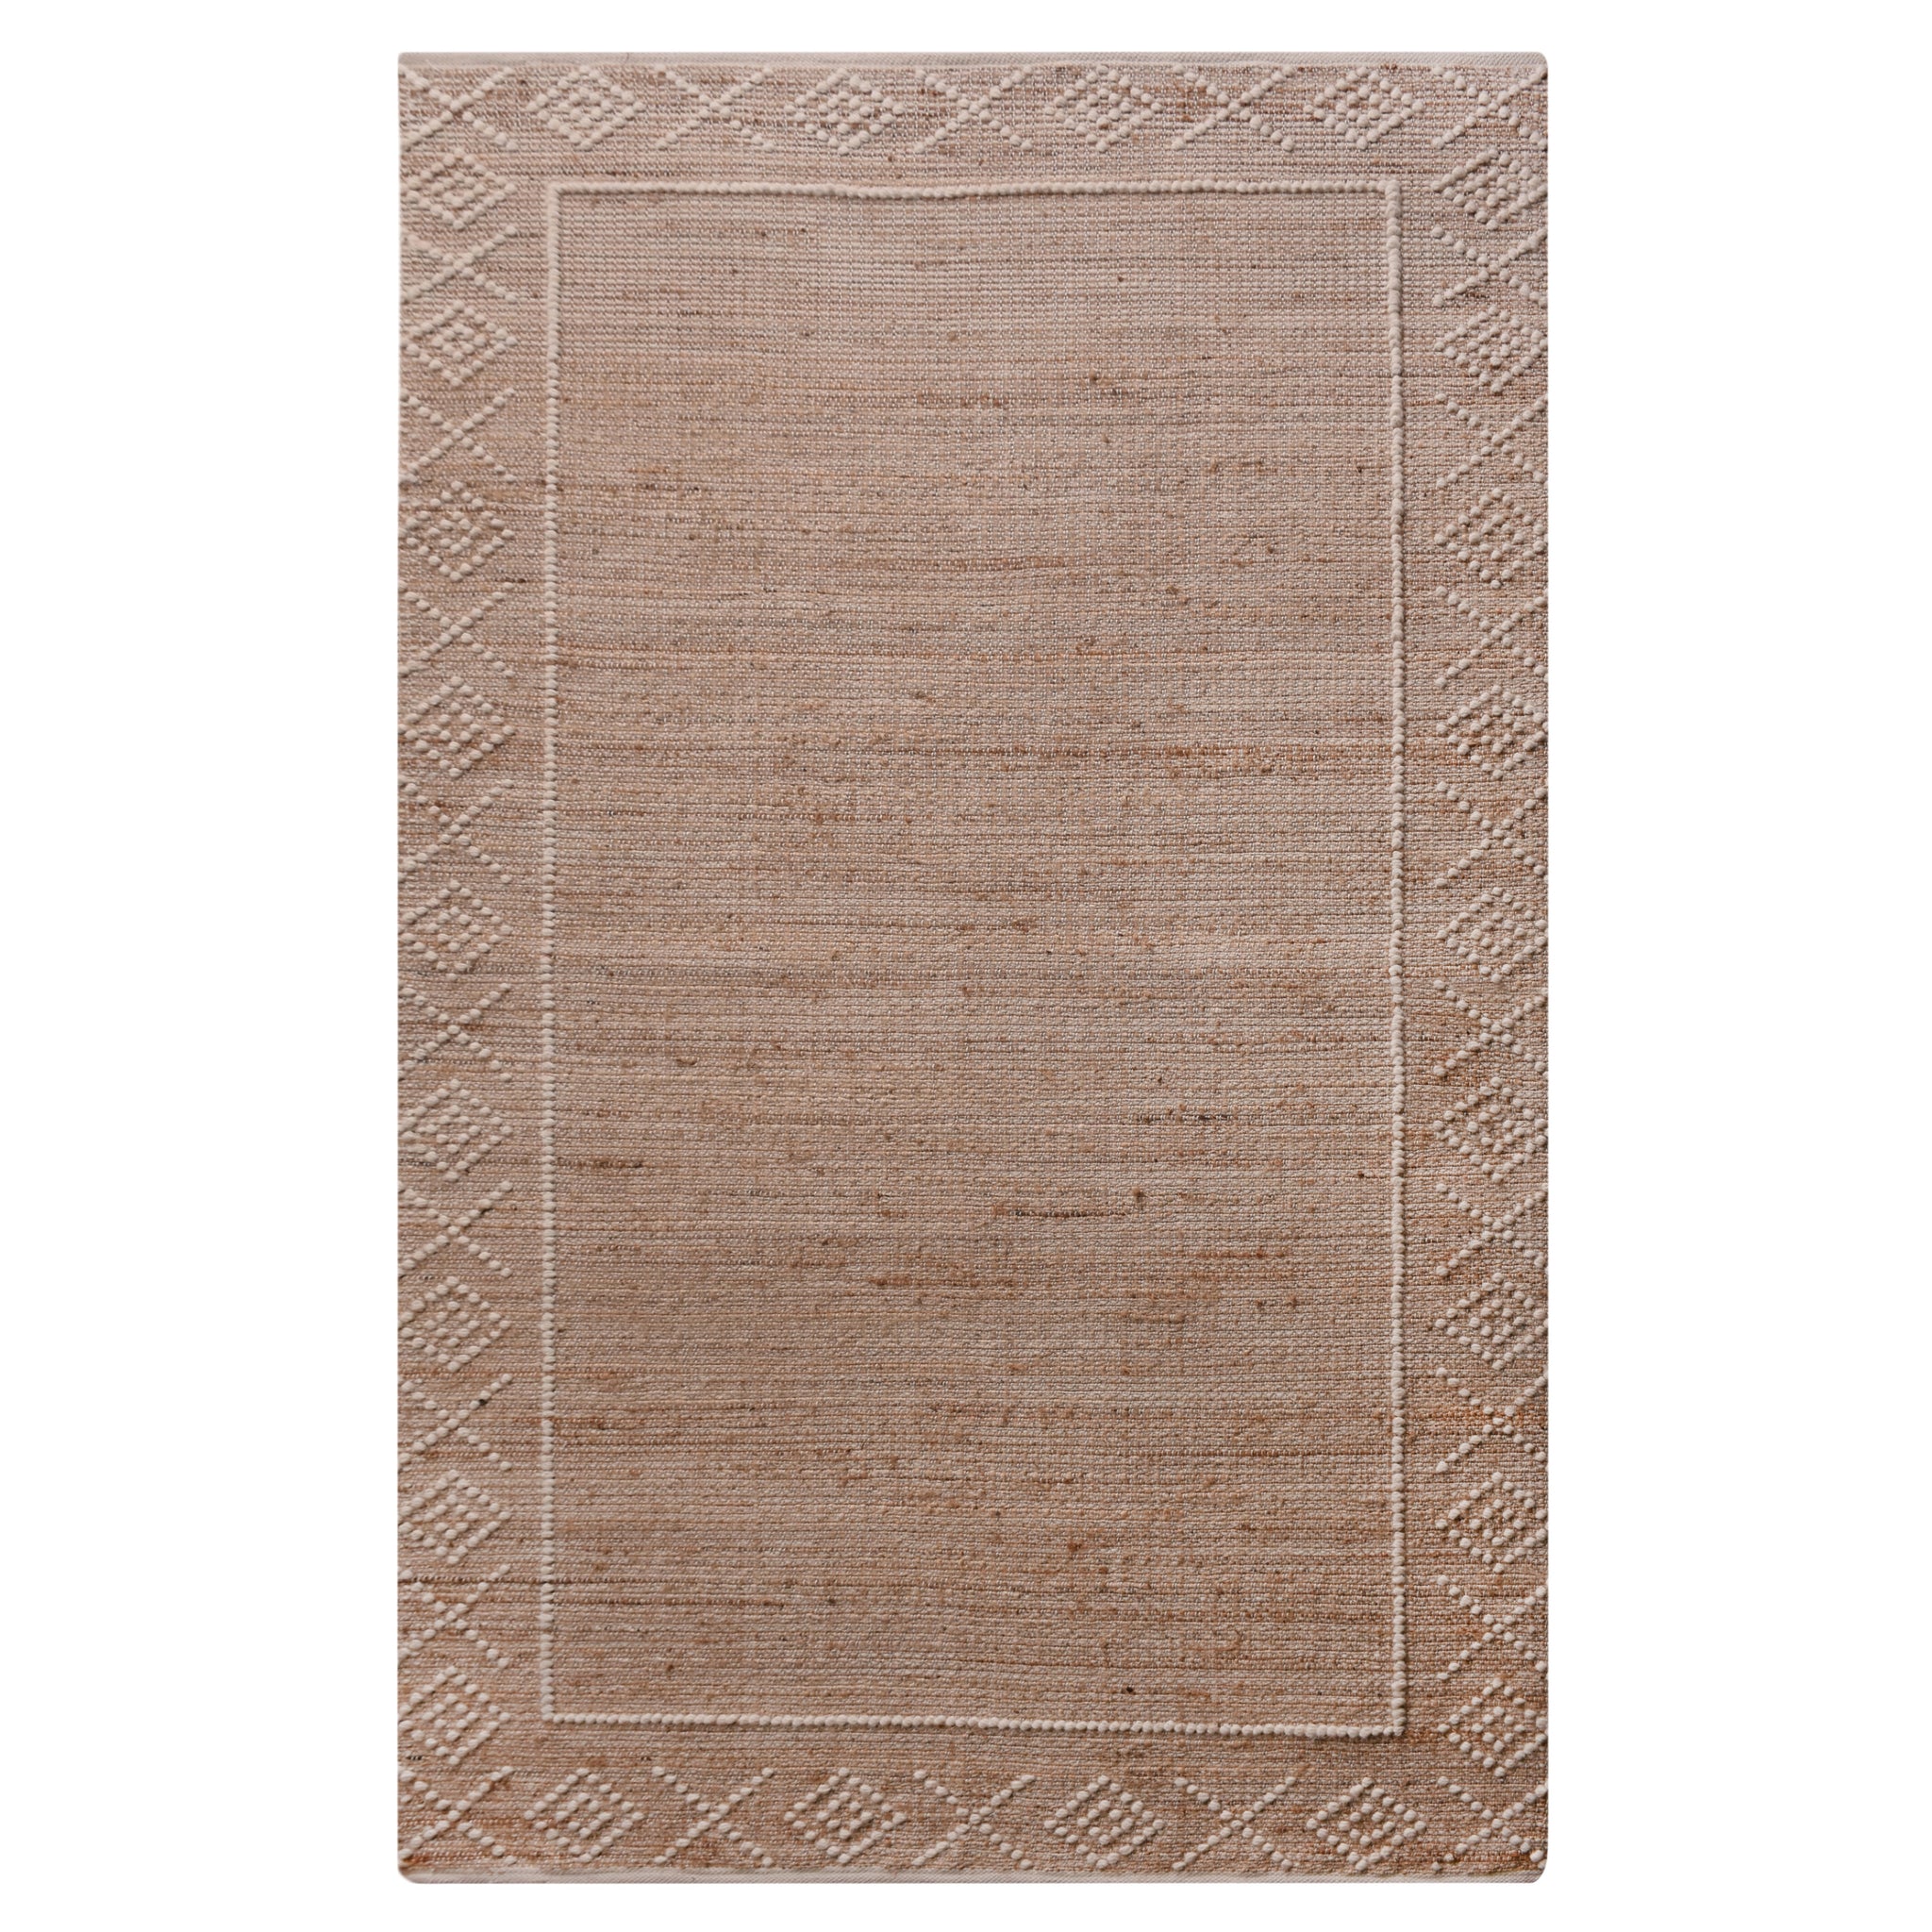 Tamlin Hand Woven Natural & Ivory Jute and Wool Rug 160x230cm